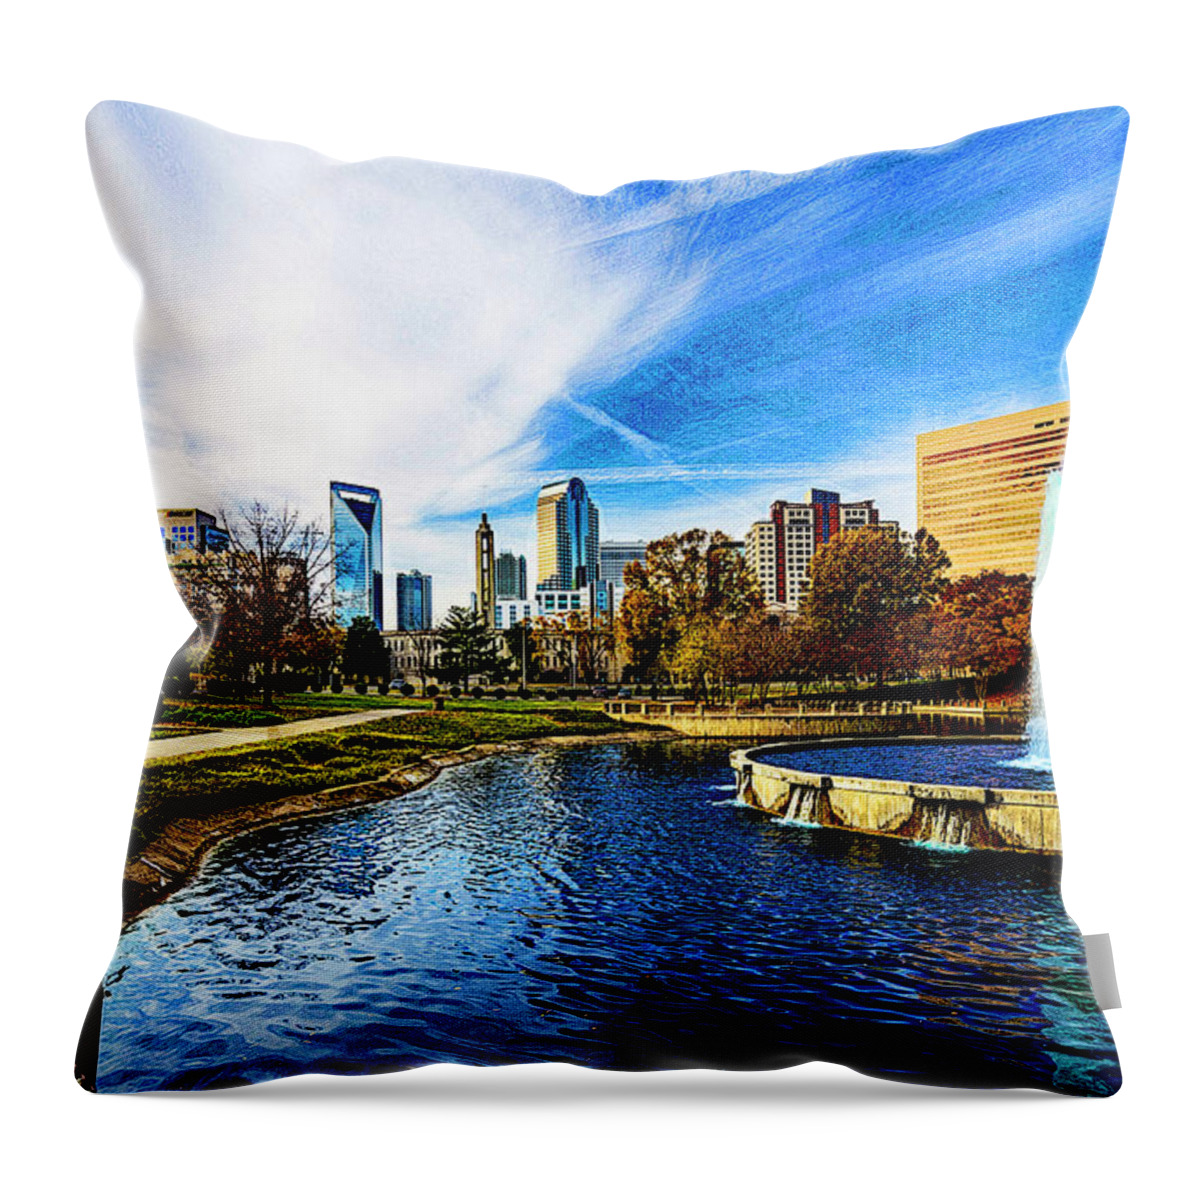 Marshall Park Throw Pillow featuring the digital art Marshall Park Vintage by SnapHappy Photos